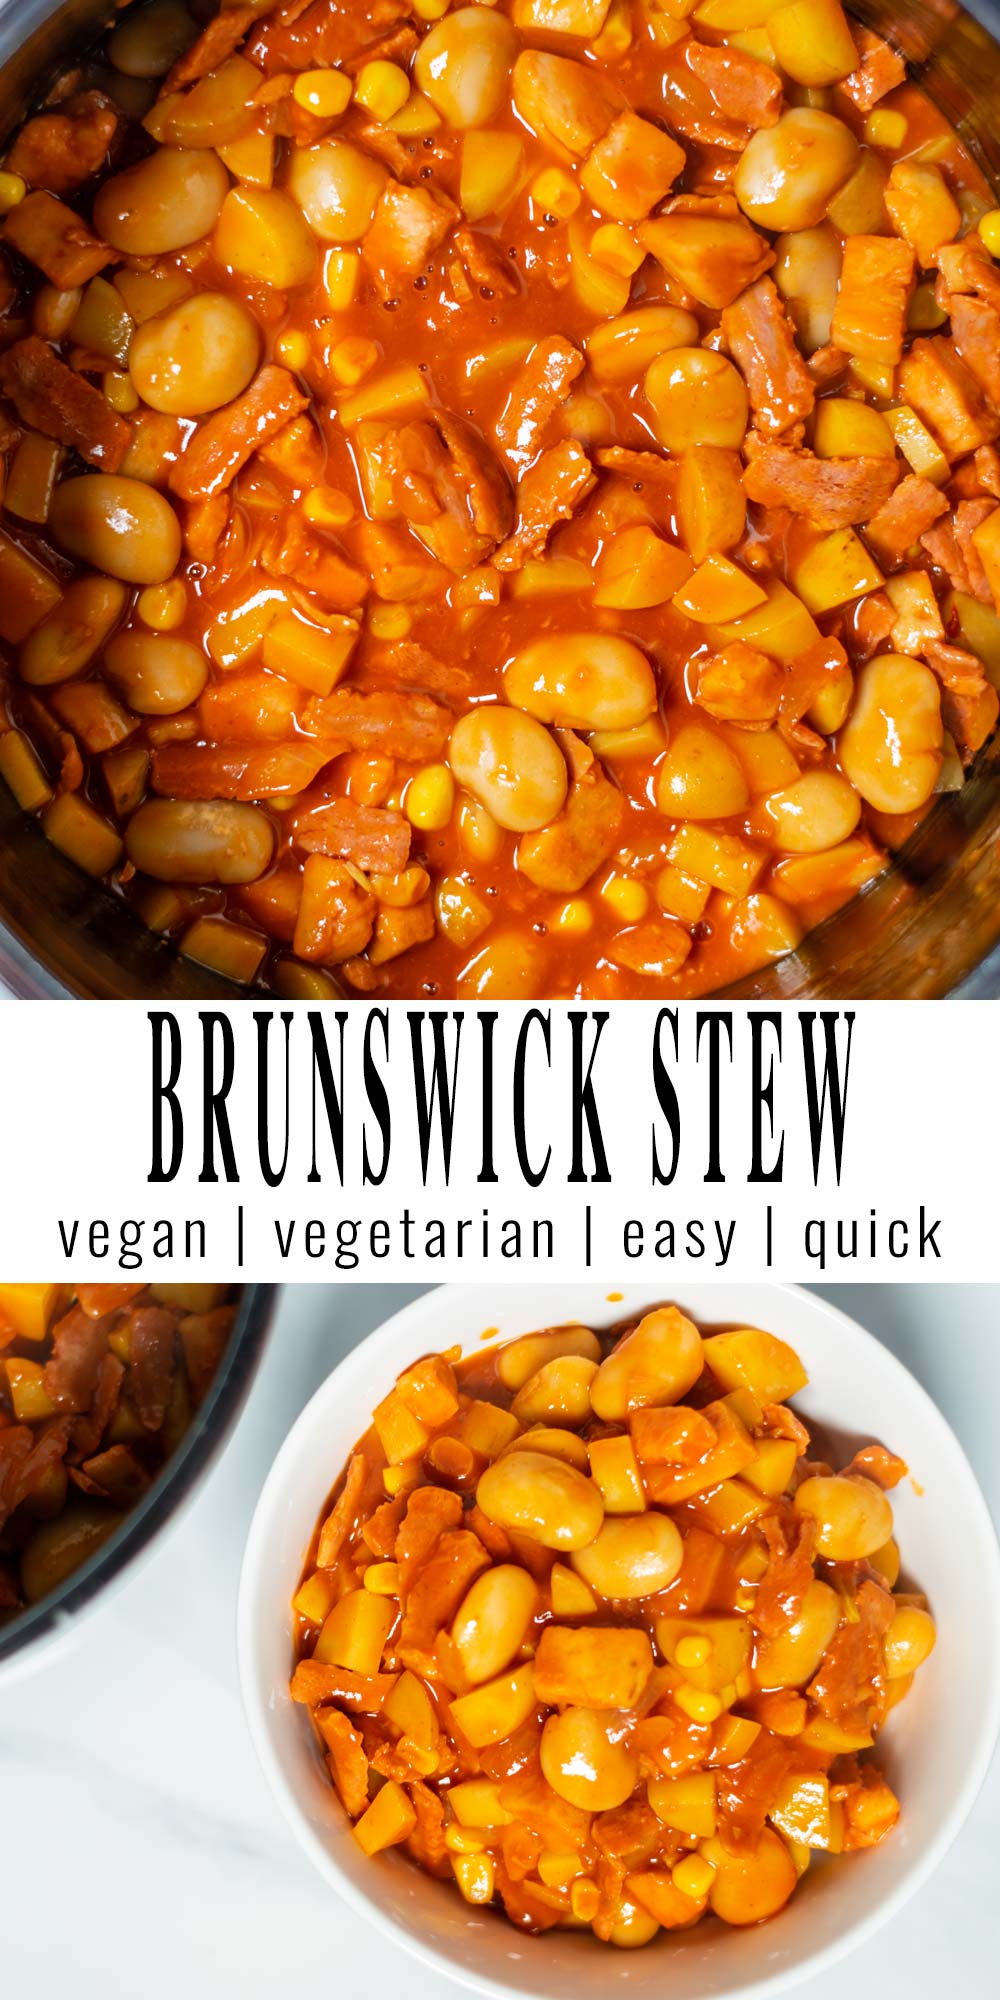 Collage of two pictures of the Brunswick Stew with recipe title text.